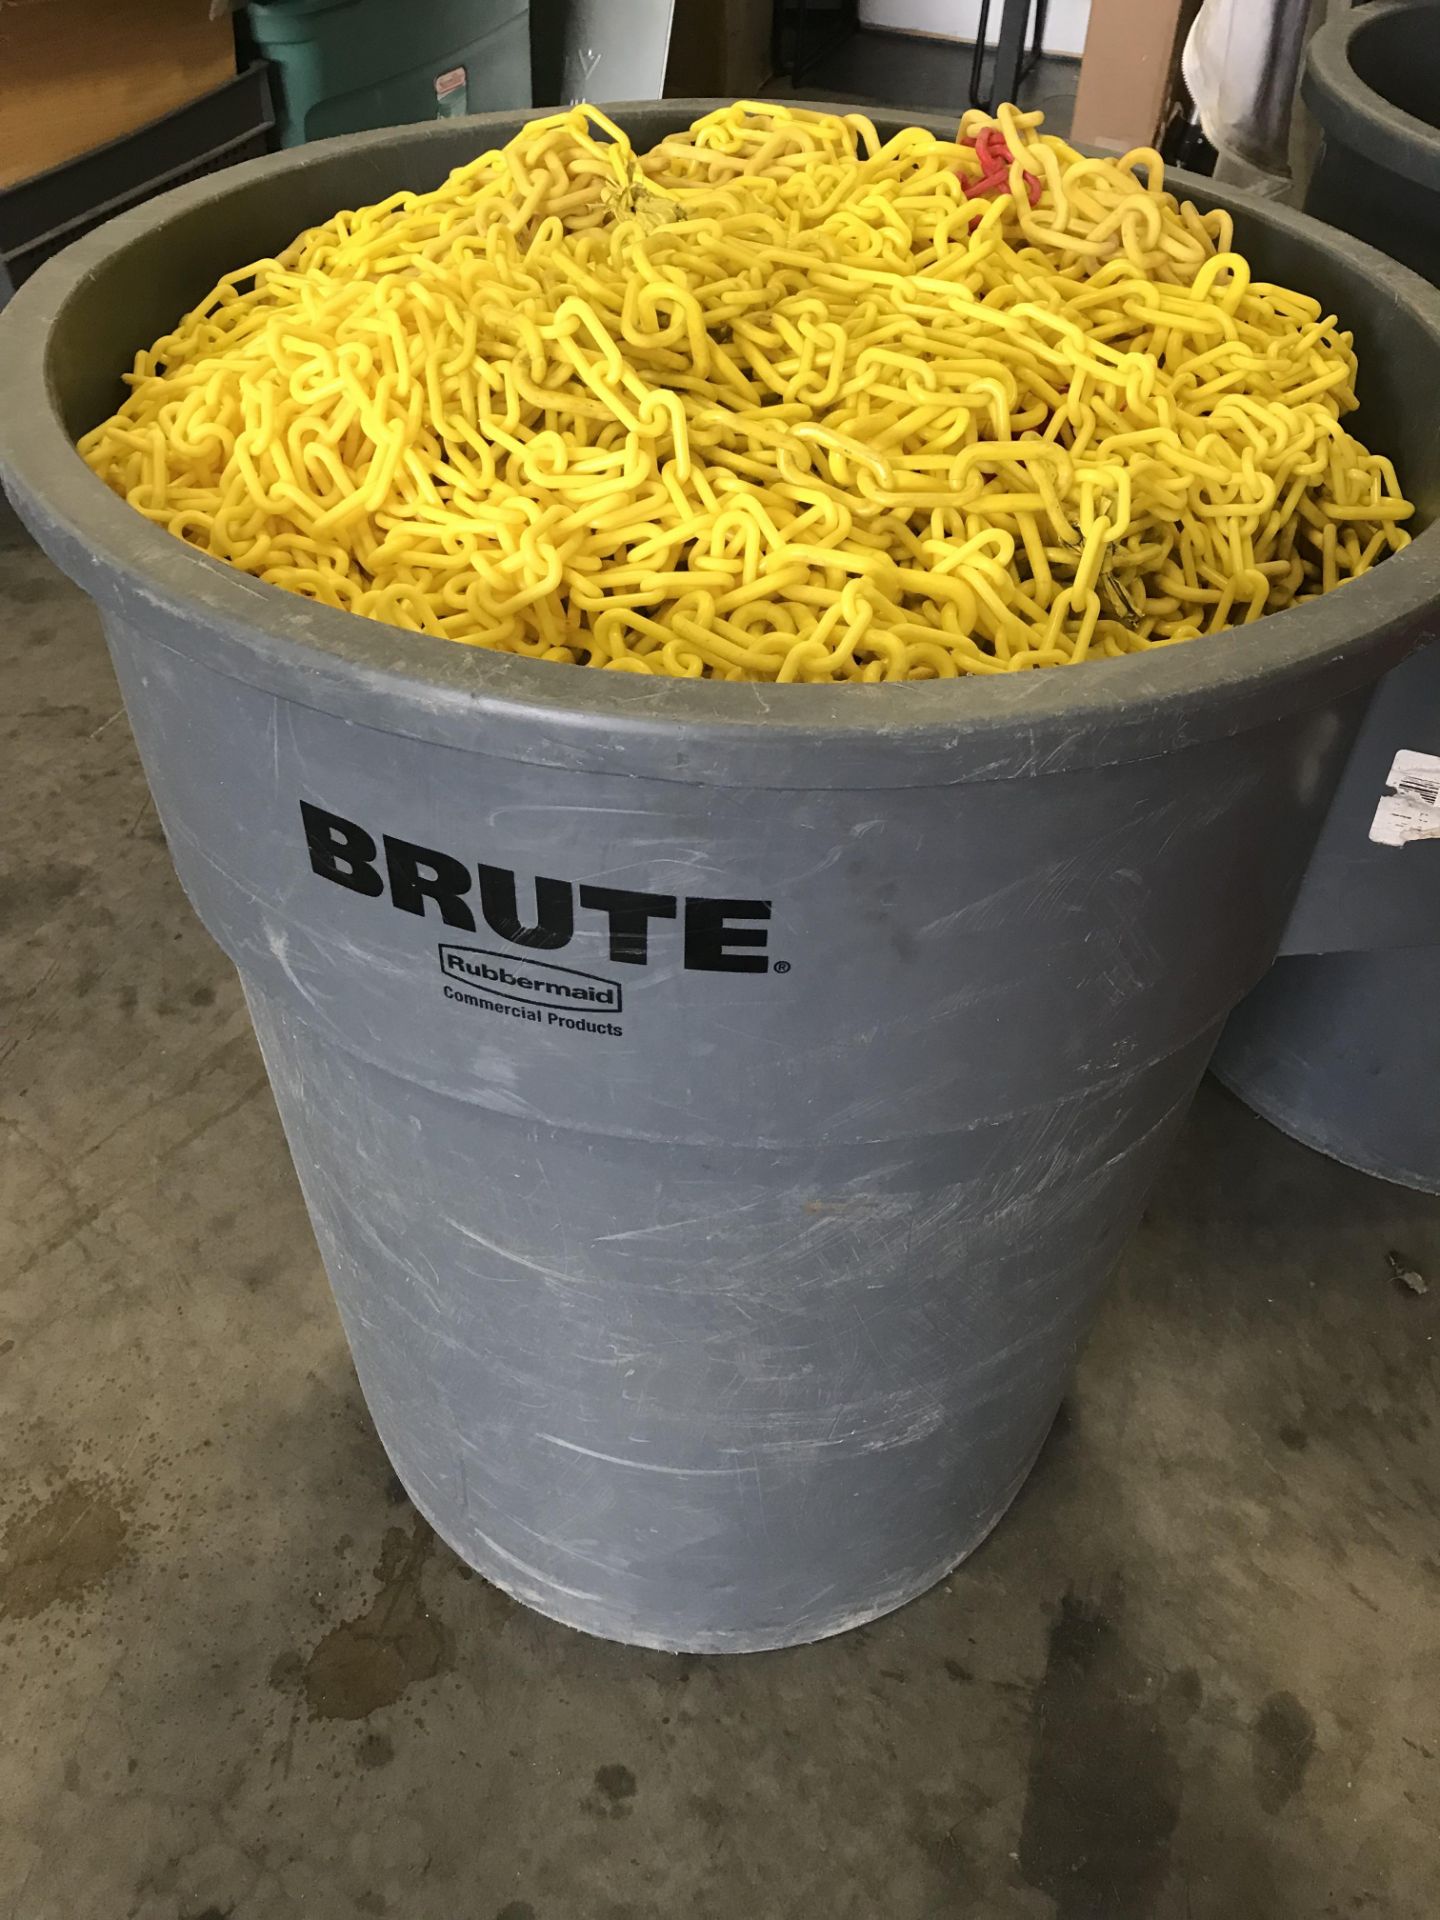 55 GALLON INDUSTRIAL TRASH CAN FILLED WITH PLASTIC SAFETY CHAIN